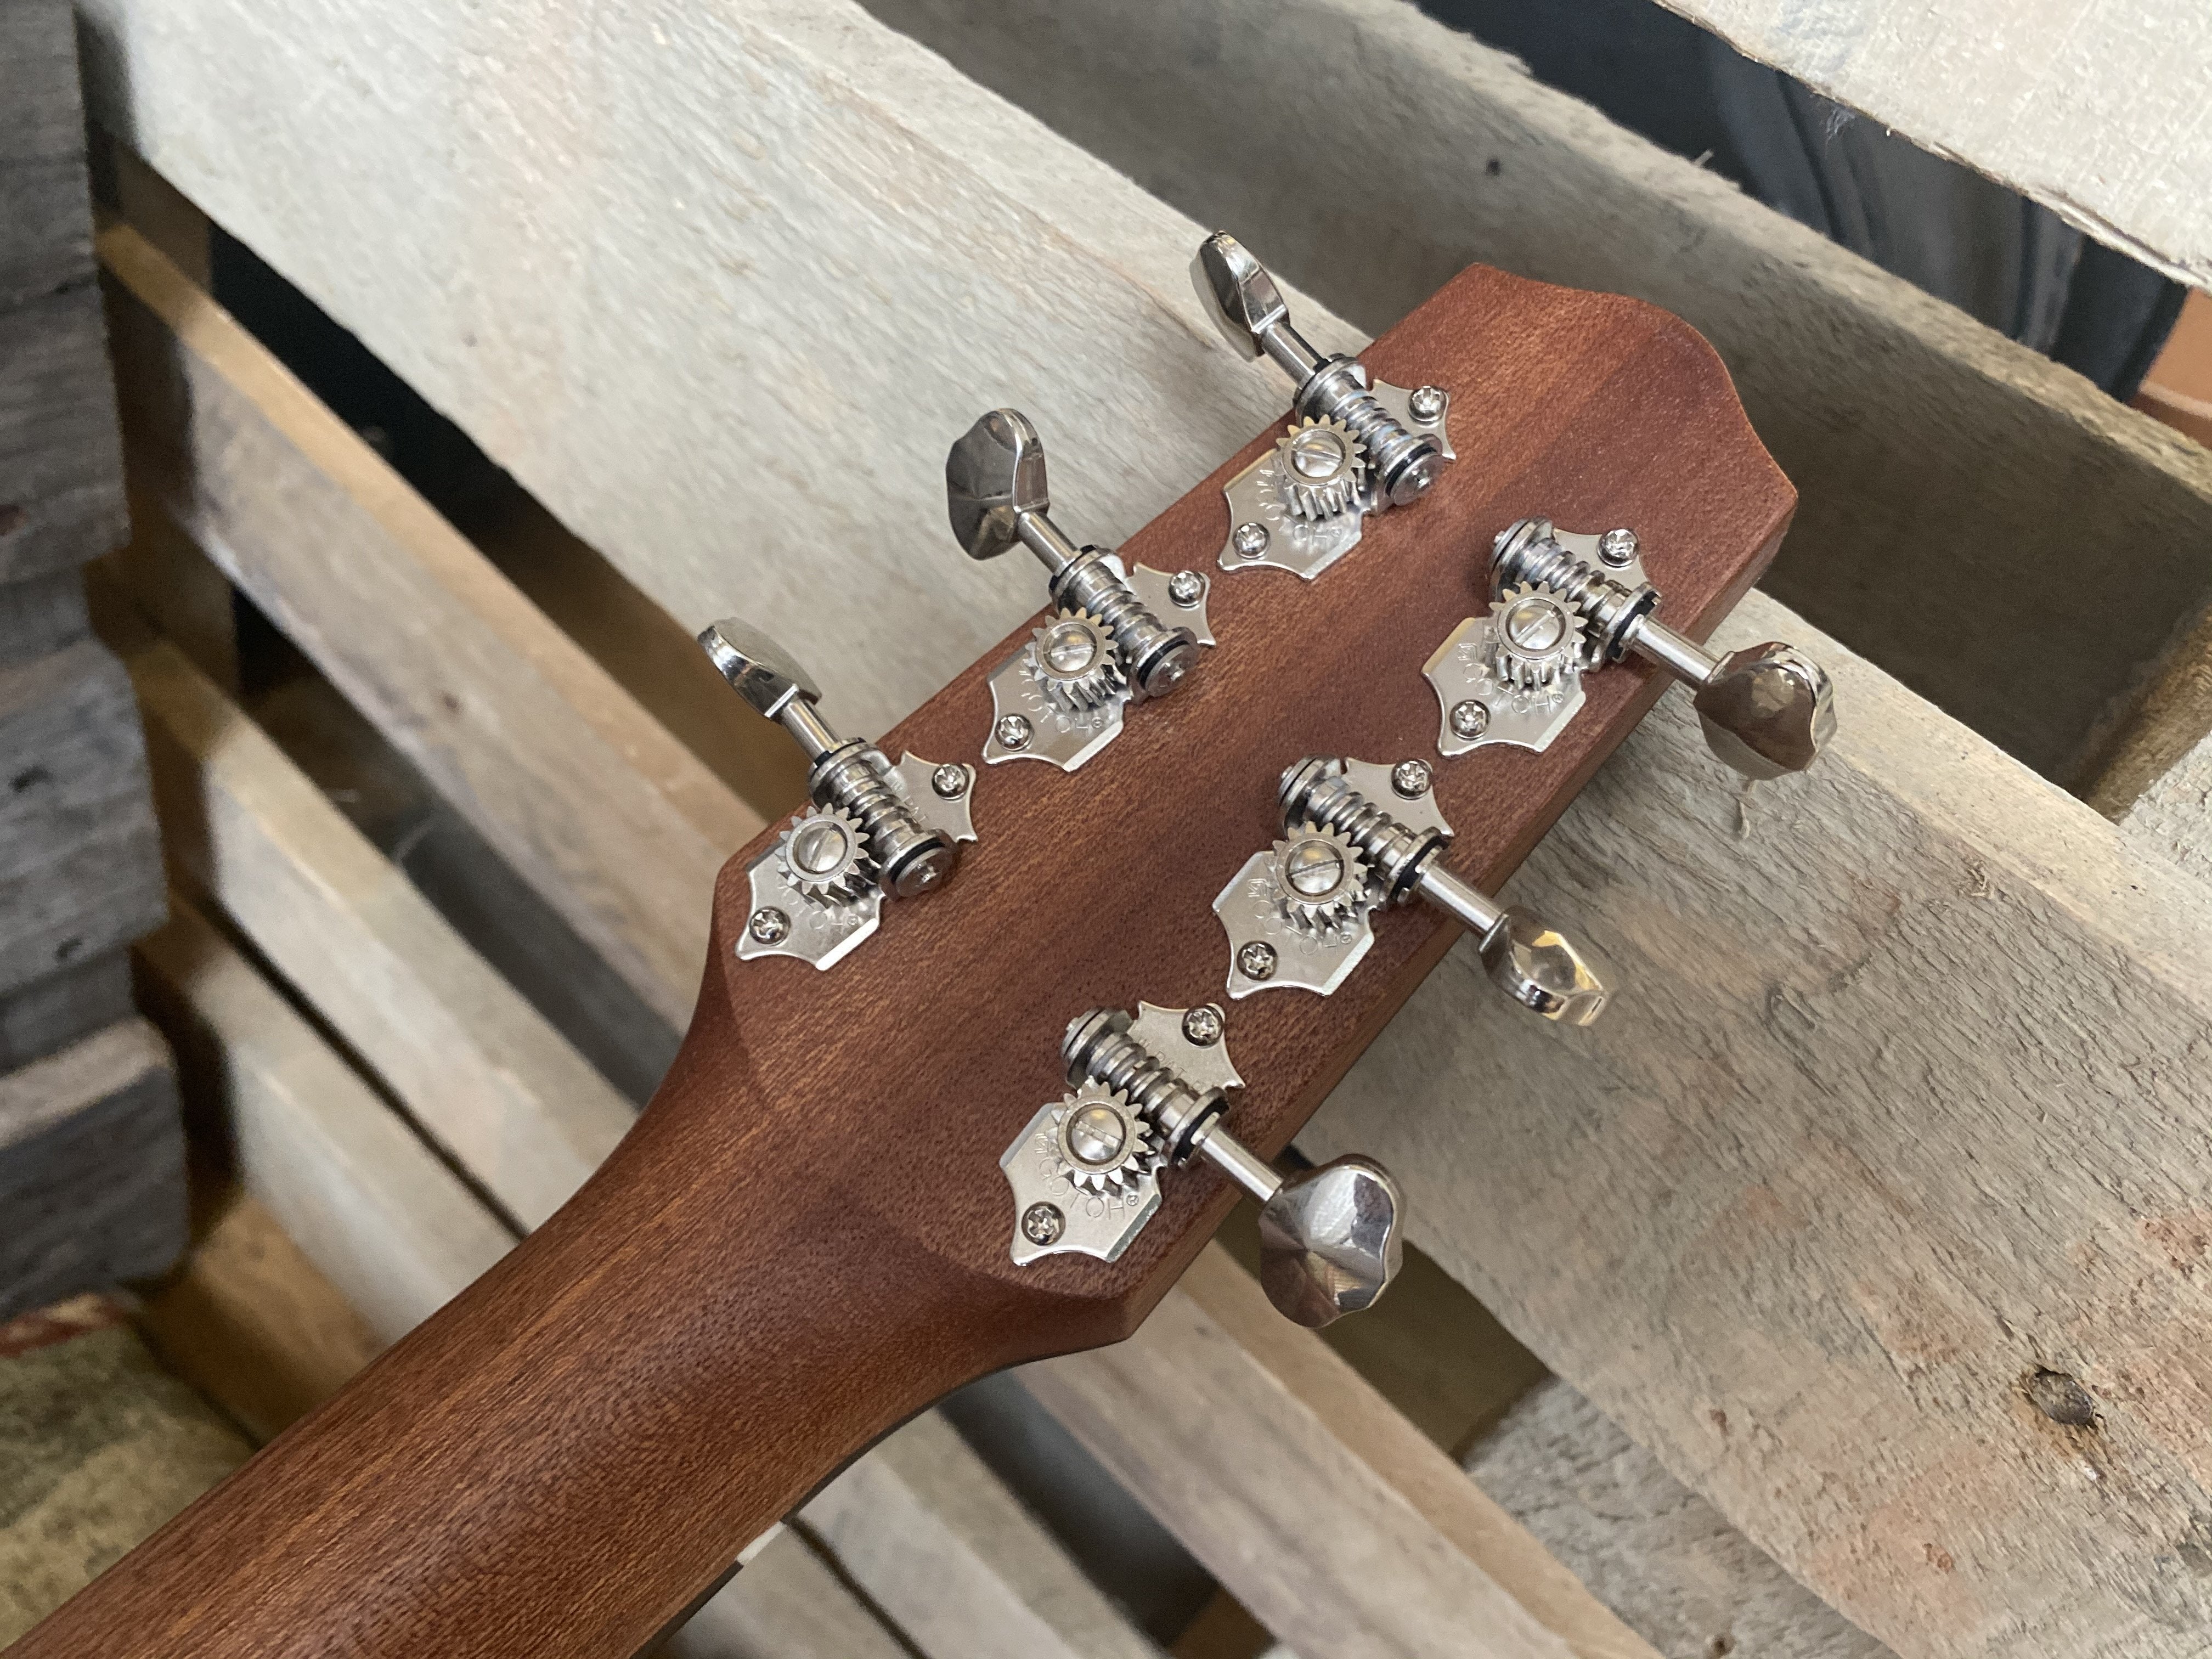 Dowina Walnut BV S, Acoustic Guitar for sale at Richards Guitars.